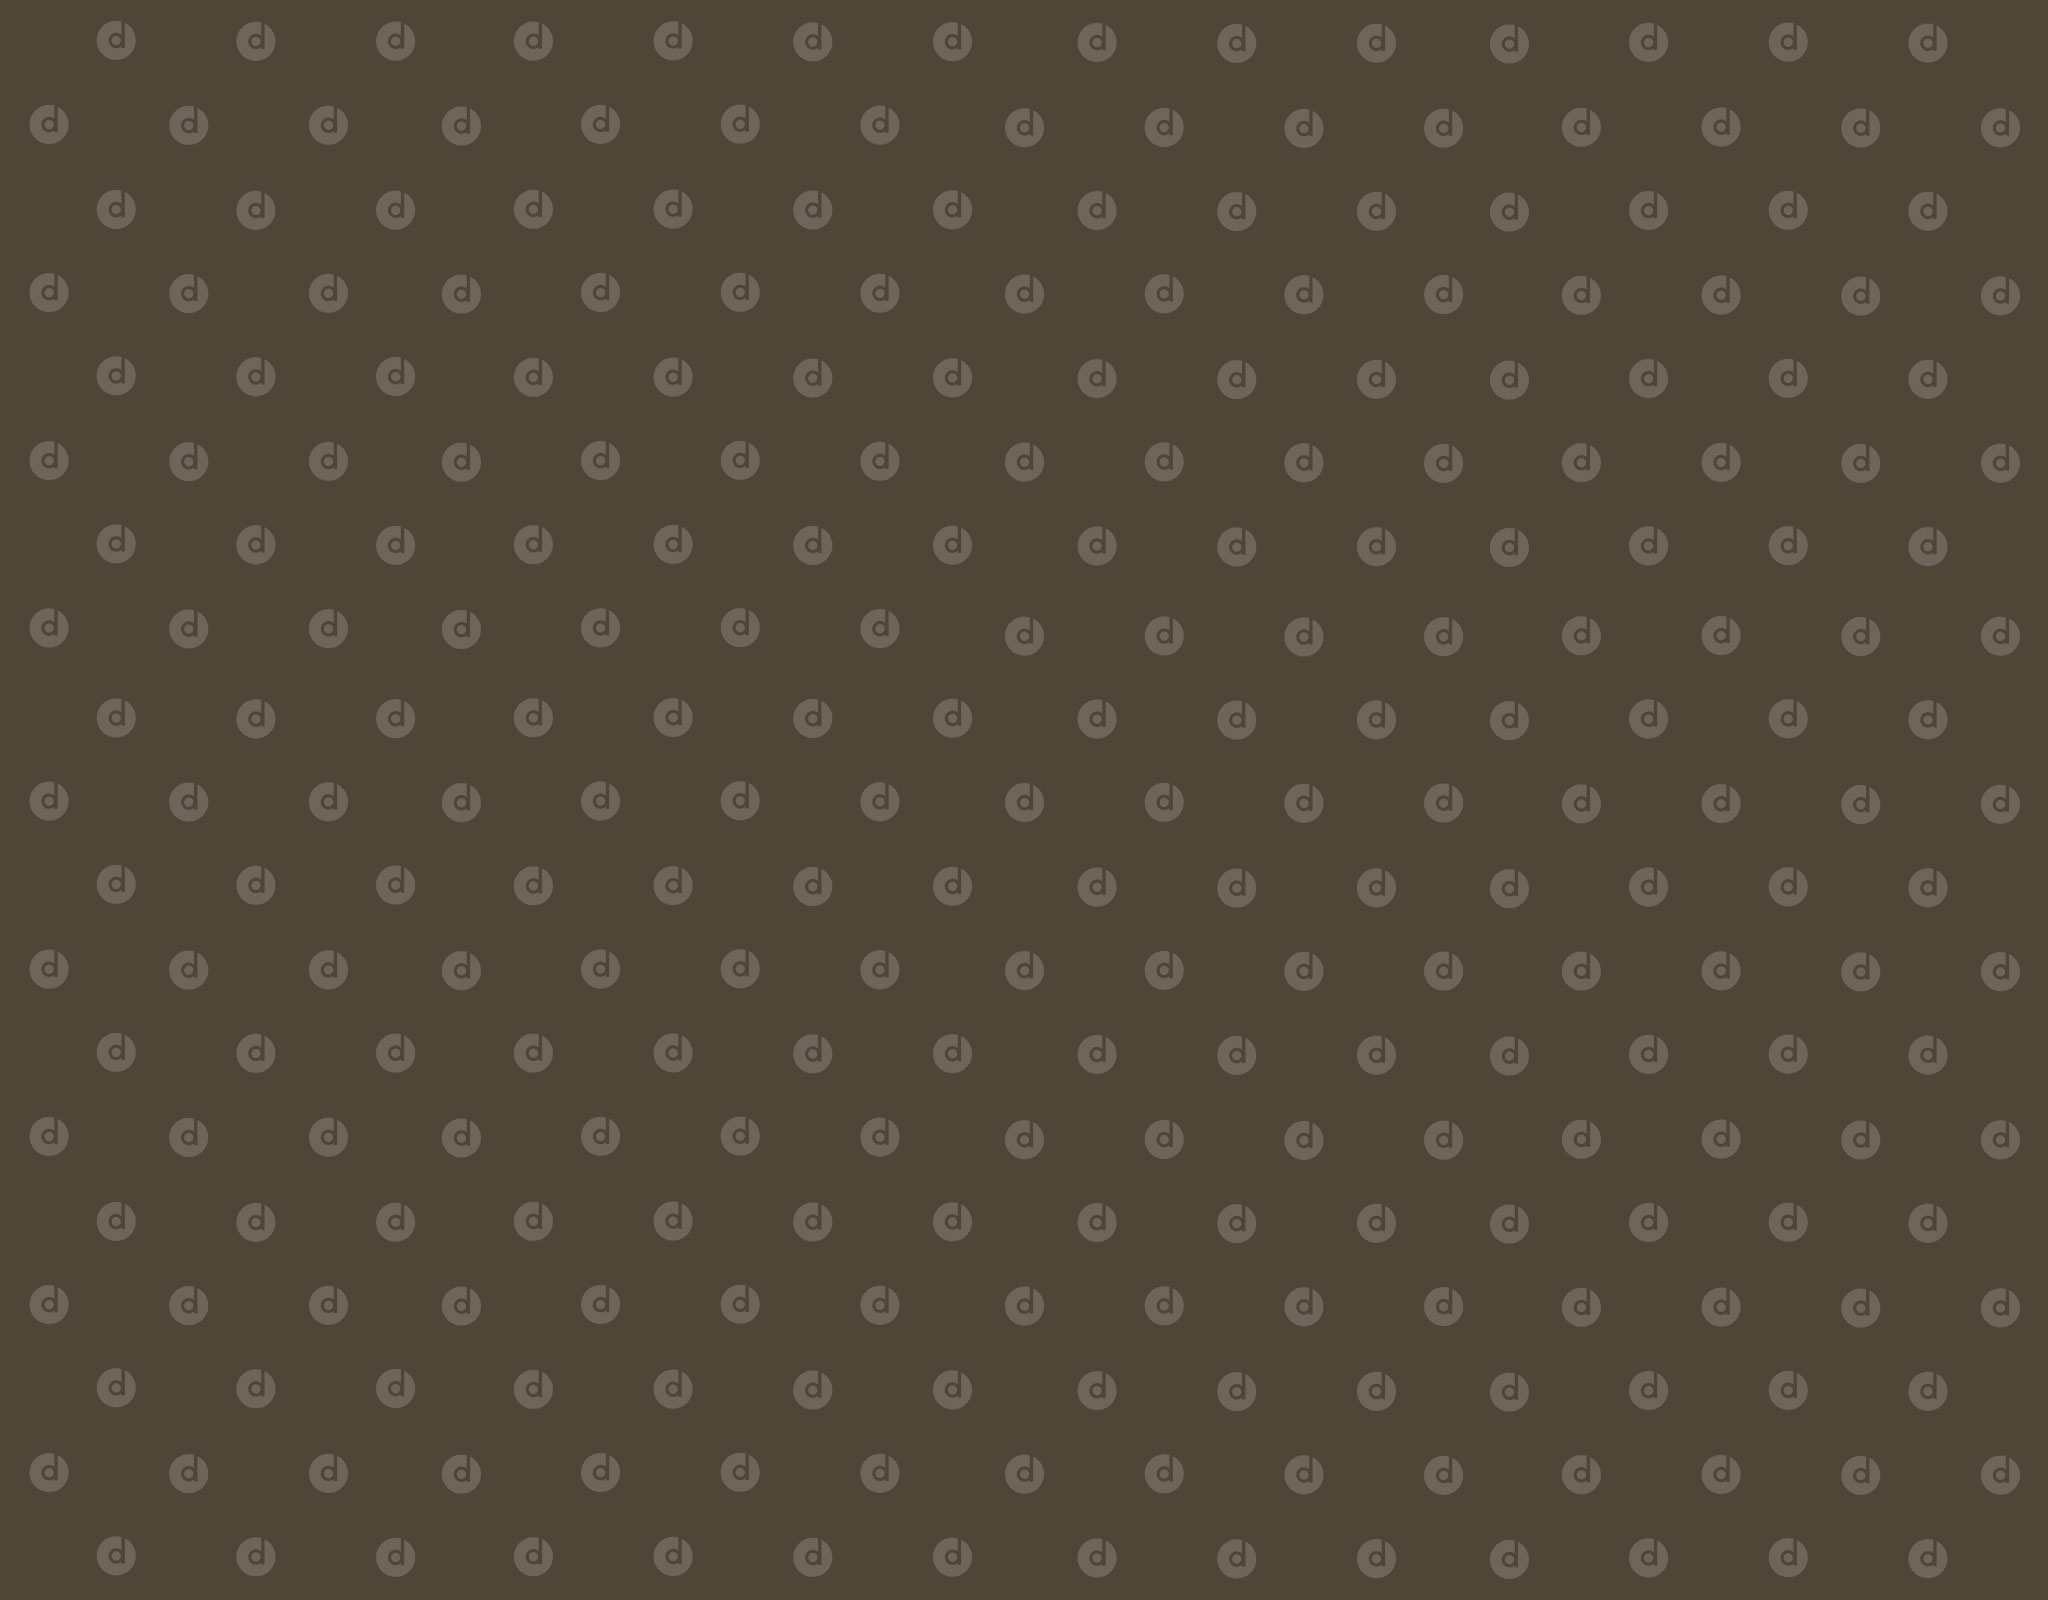 Patterned background with Dundee Bank logo